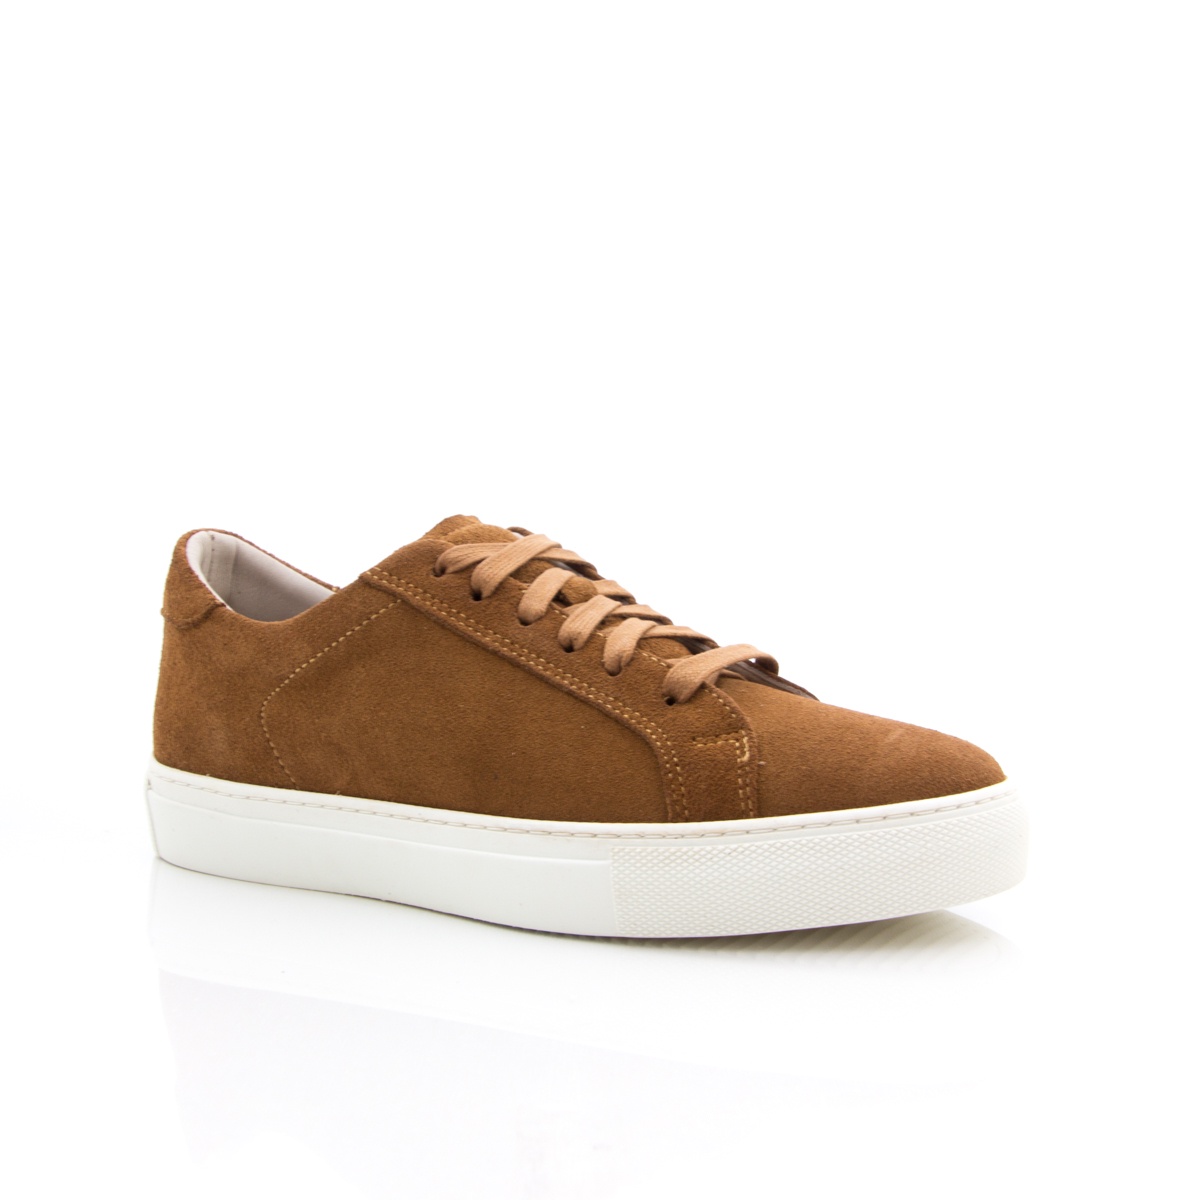 Sempre Di Sneakers Camel - Issimo Shoes